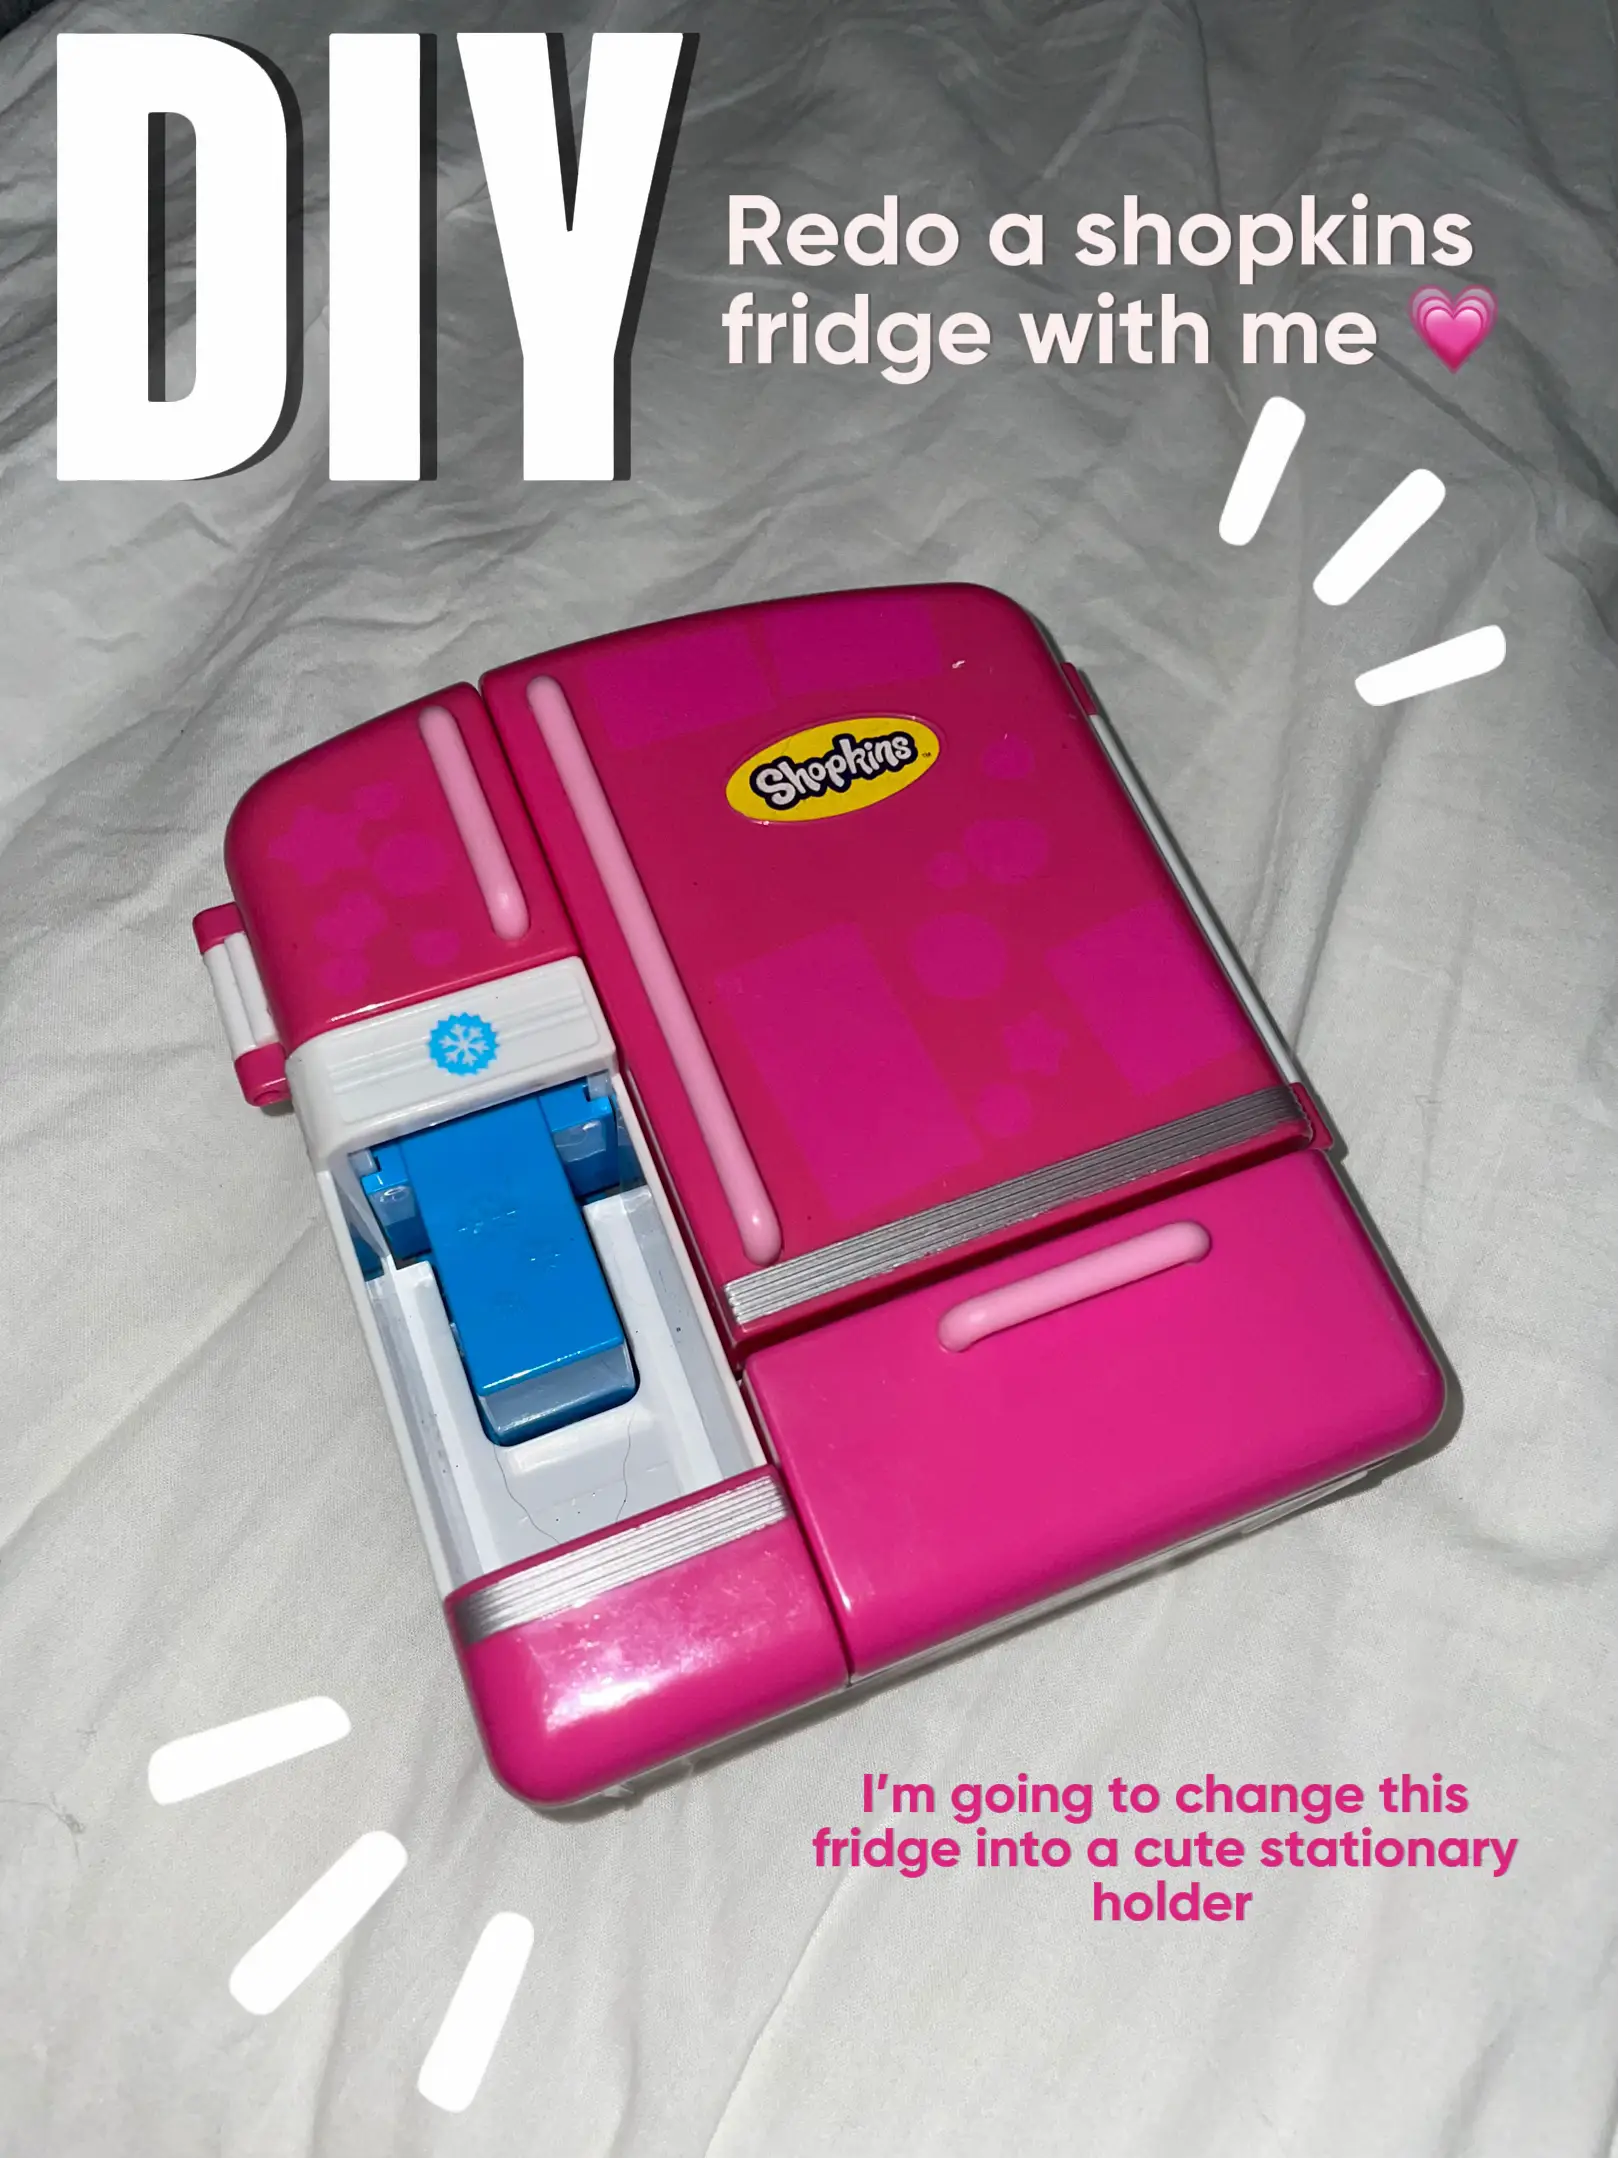  A pink fridge with a white background.